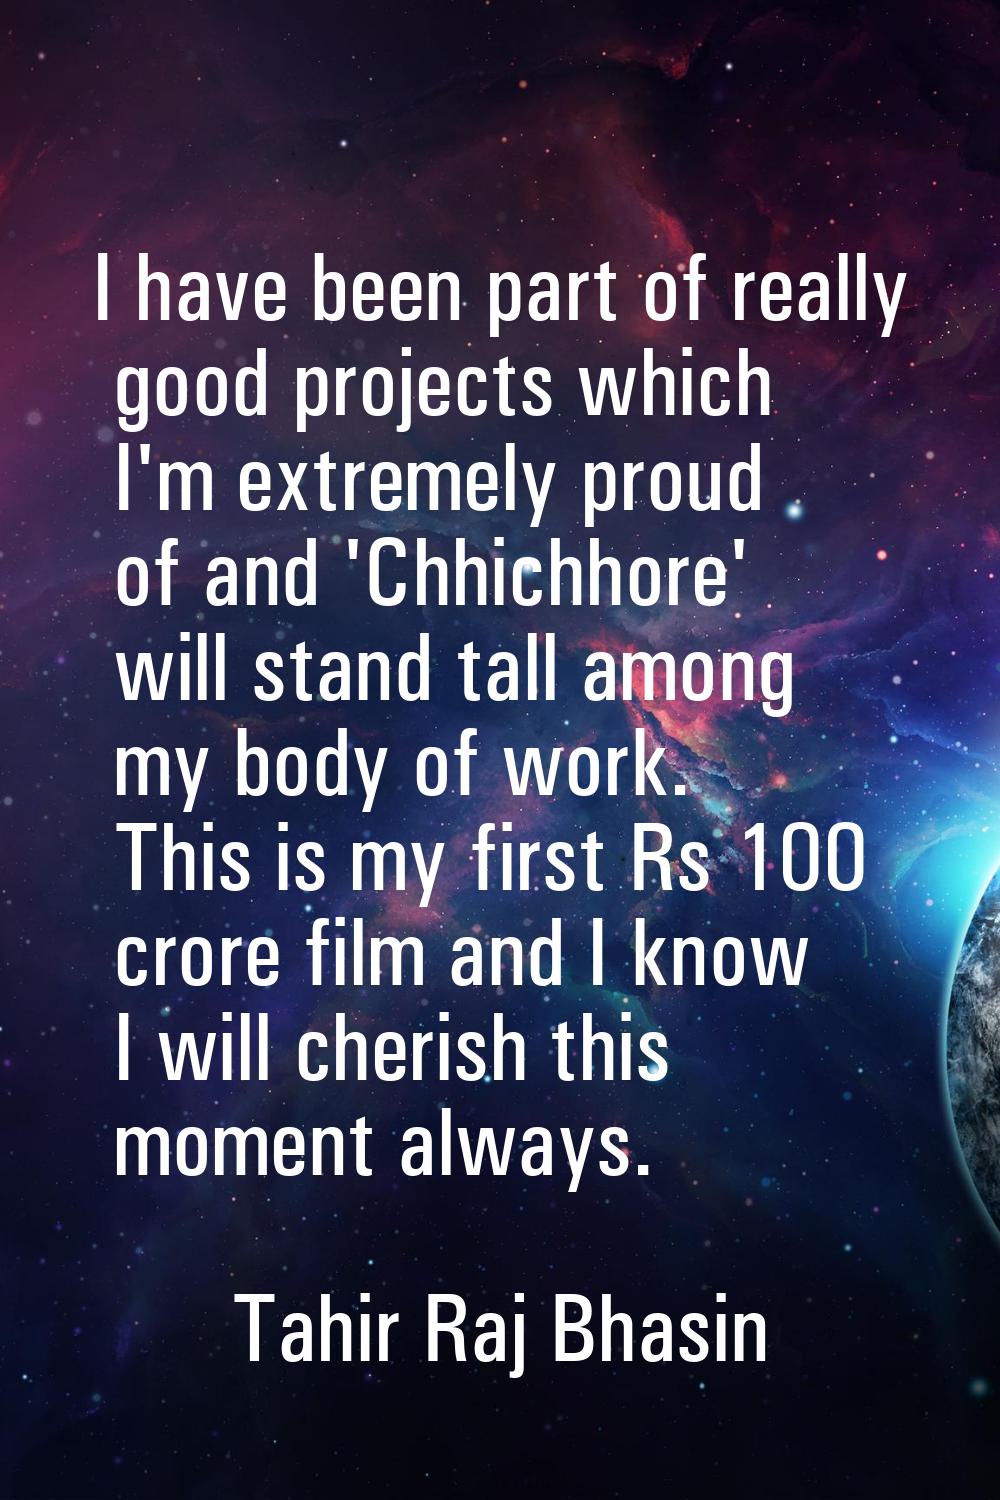 I have been part of really good projects which I'm extremely proud of and 'Chhichhore' will stand t